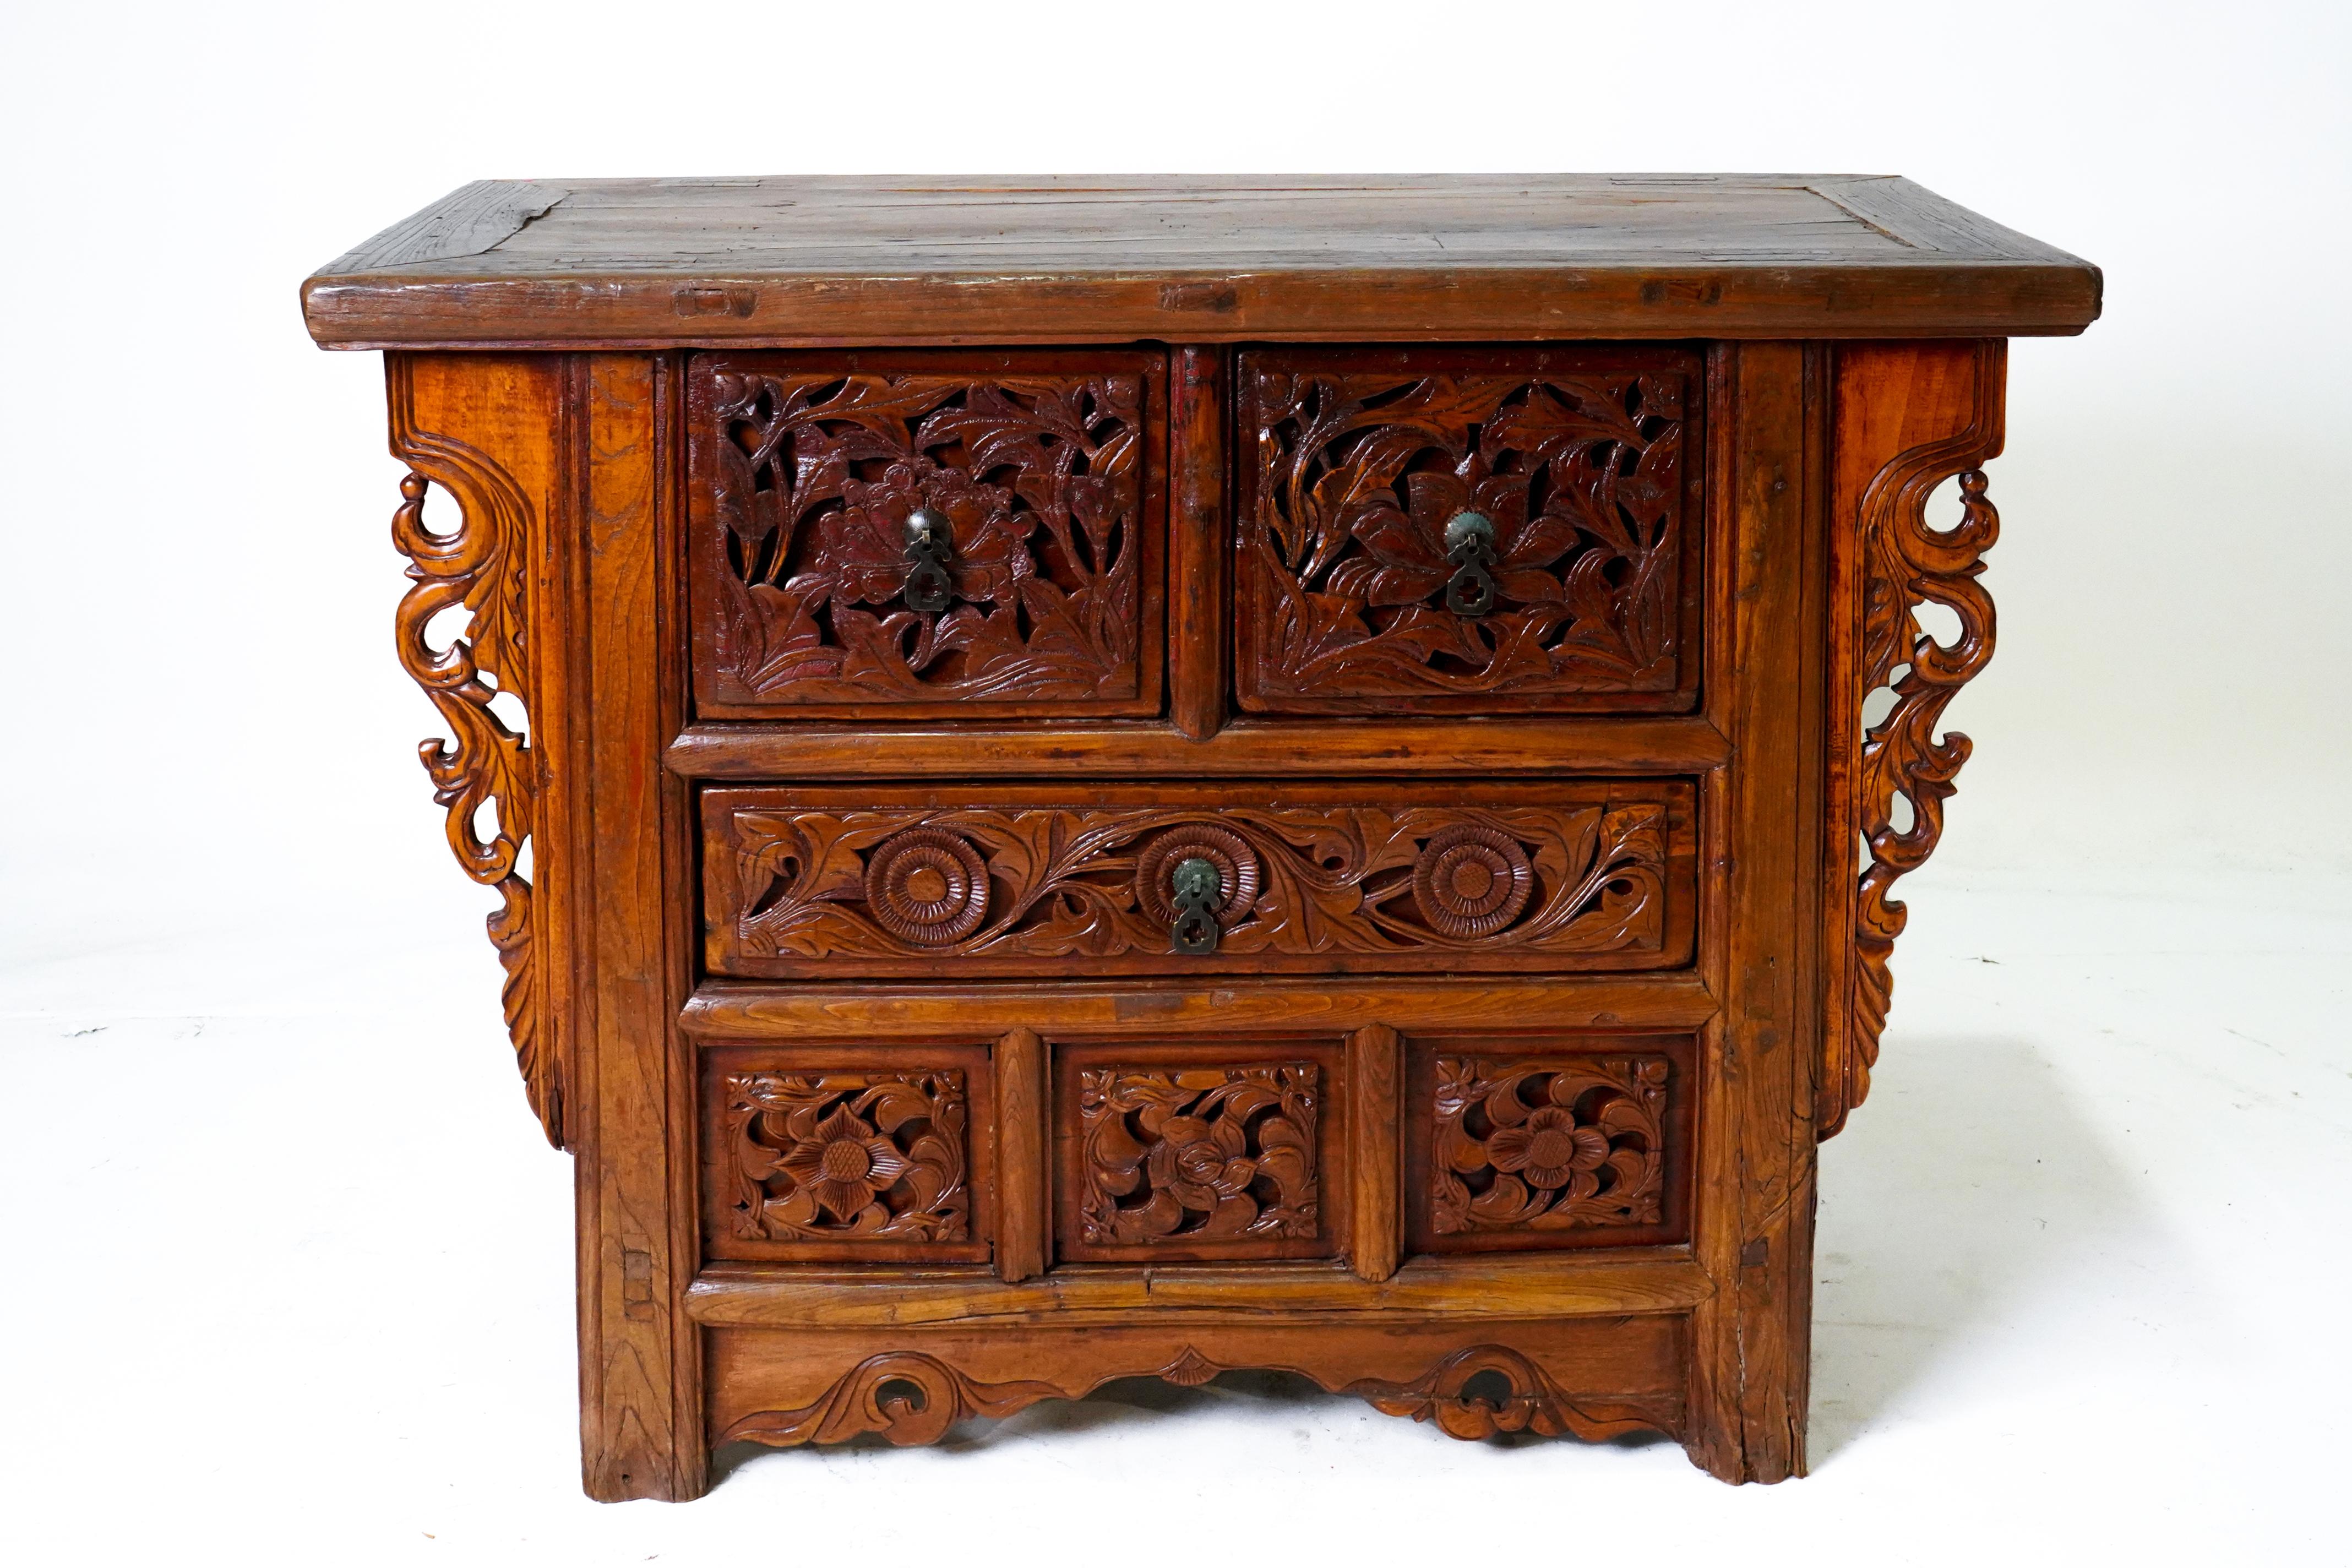 A Chinese Provincial-style wooden butterfly cabinet from the 19th century, with carved spandrels, drawers, doors and faded oxblood patina. This sturdy and expressive coffer, called a butterfly cabinet, features a rectangular floating panel top